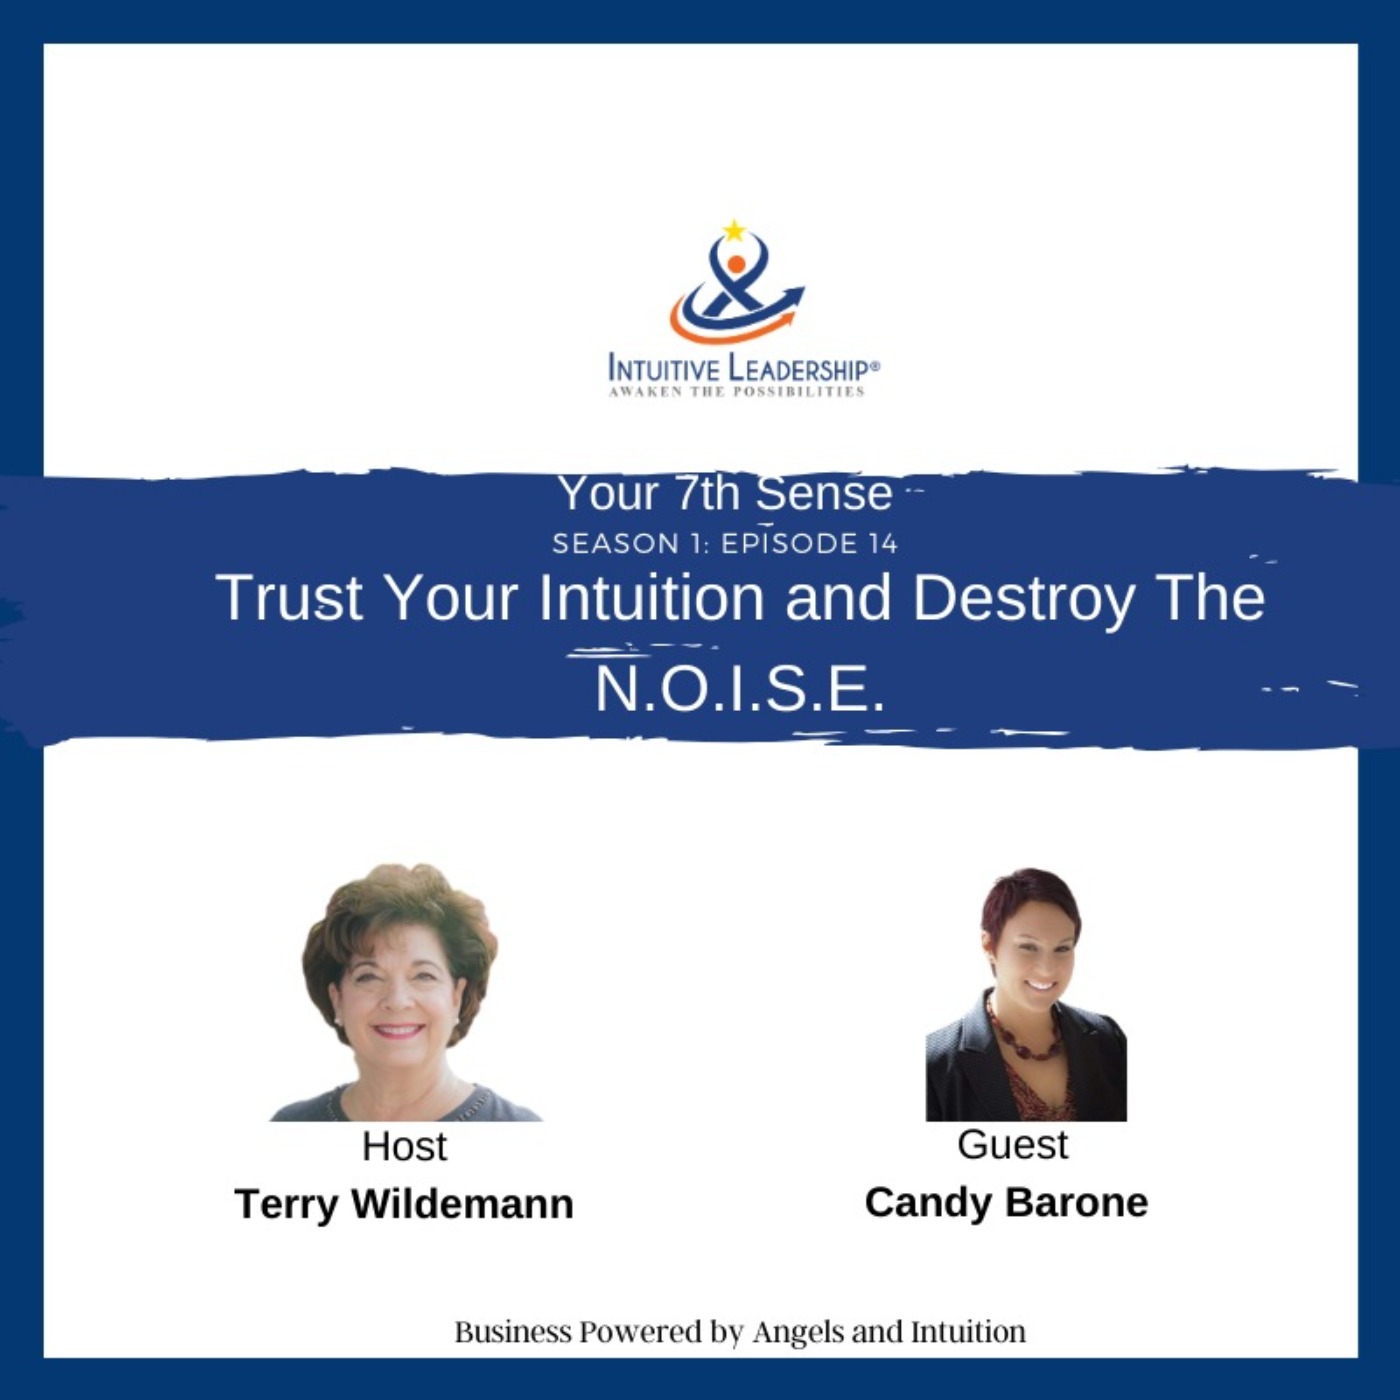 Your 7th Sense: Trust Your Intuition And Destroy The N.O.I.S.E